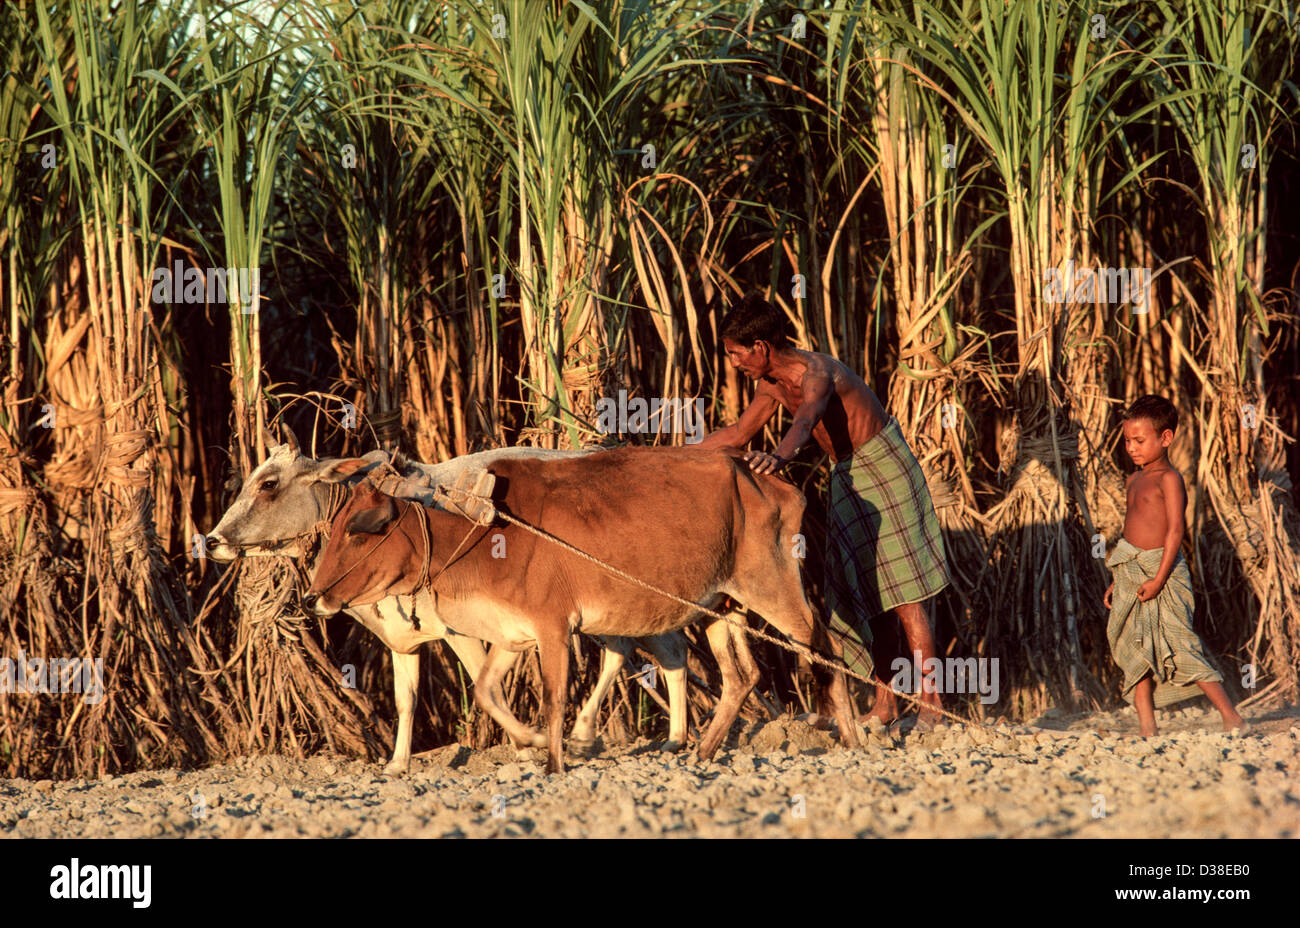 Farmer harrowing a field by standing on a flat board pulled by 2 oxen after the harvesting of sugarcane. Tangail, Bangladesh Stock Photo